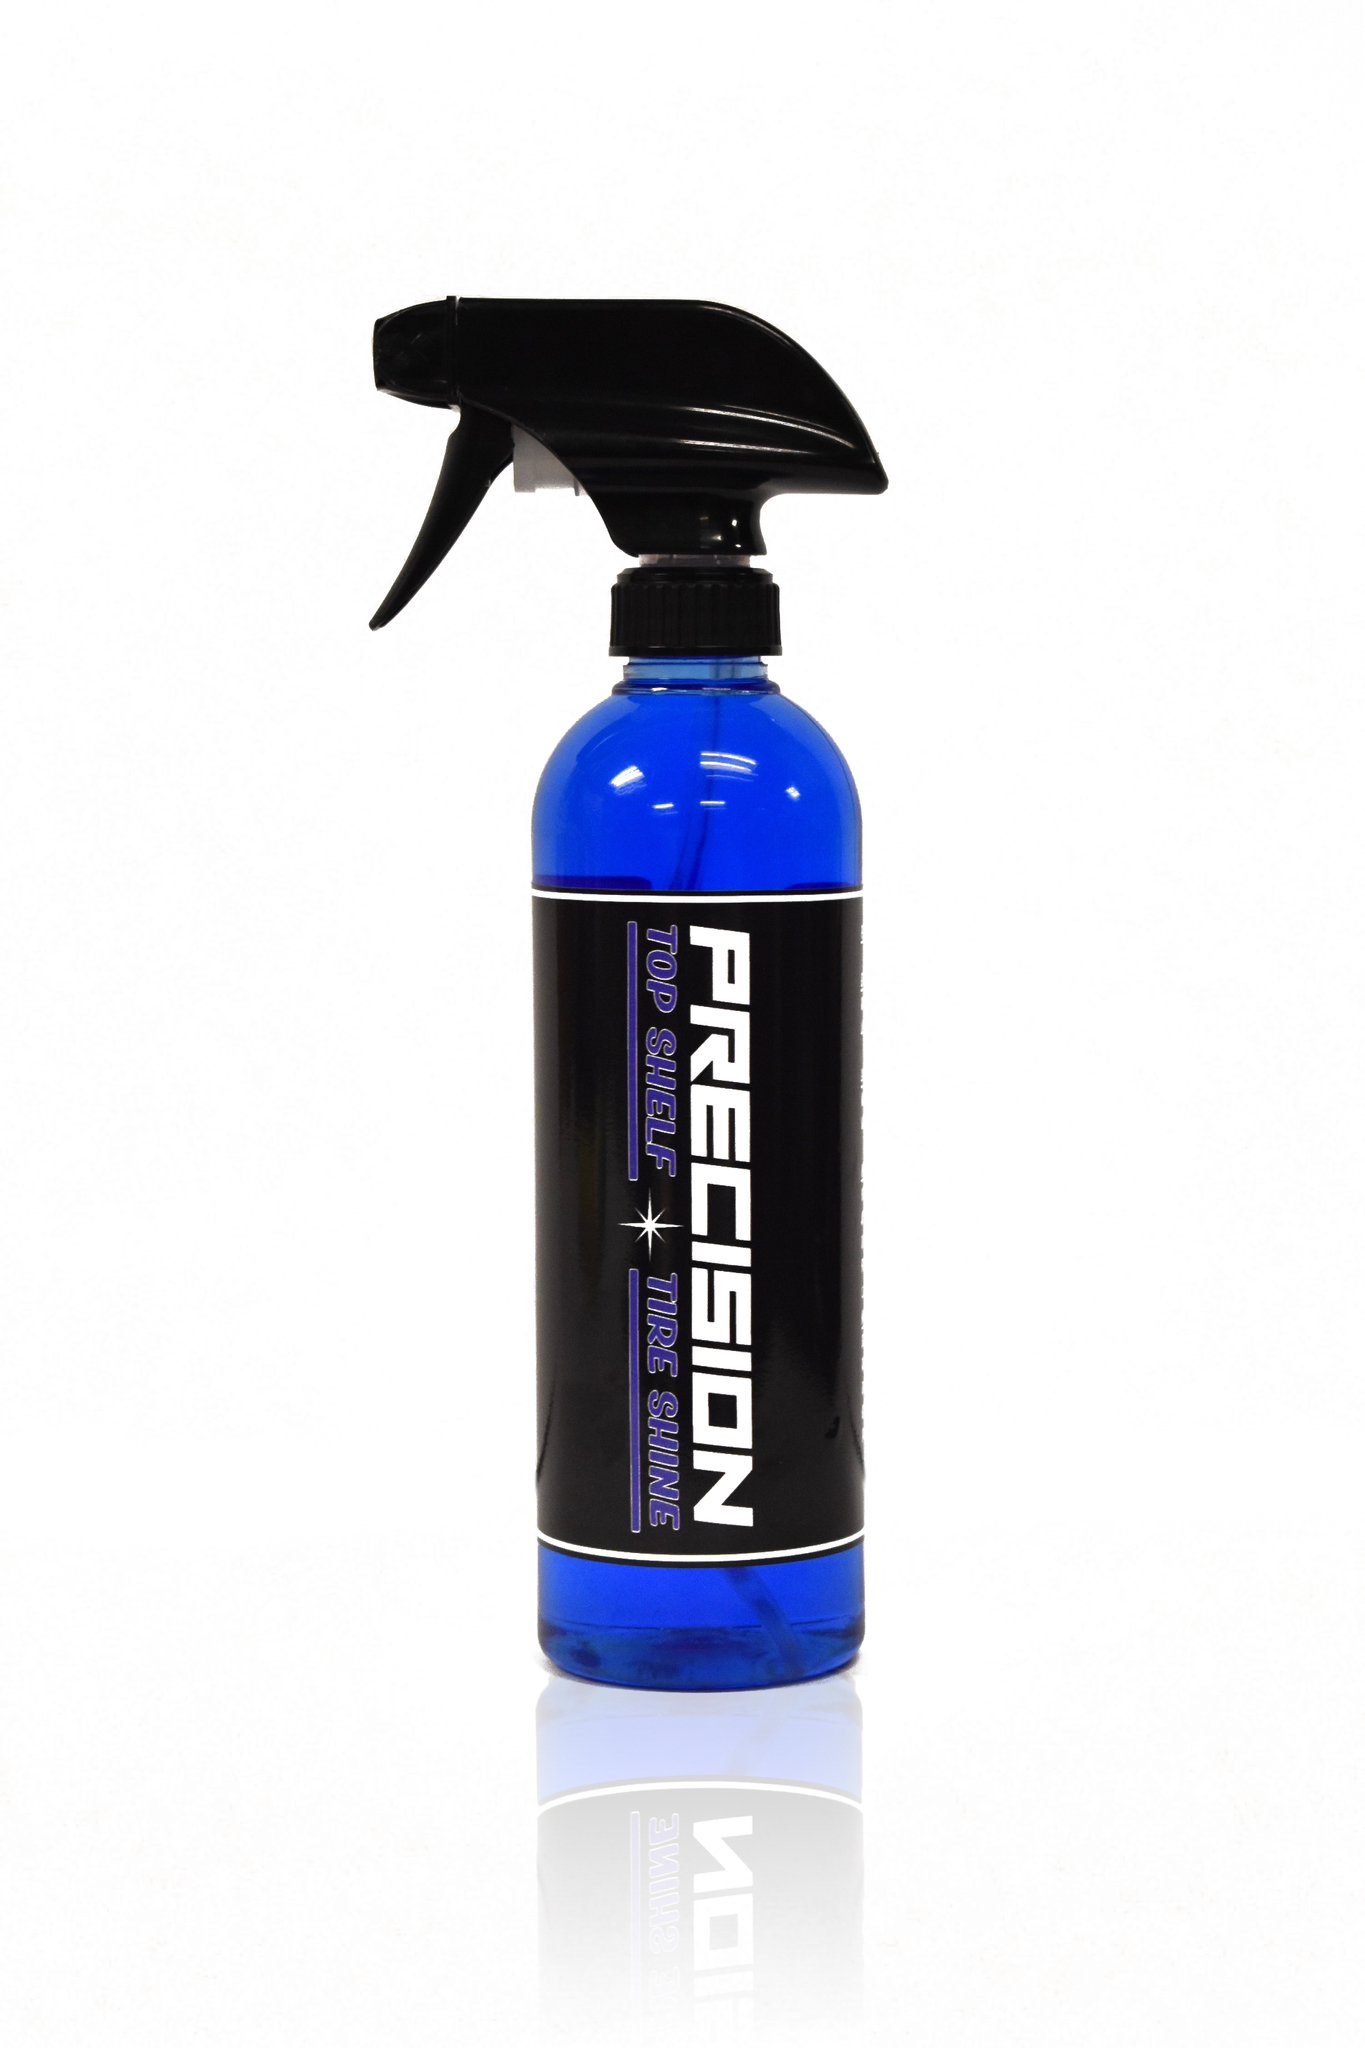 CROFTGATEUSA Tire Shine Plus the very best tire cleaning product